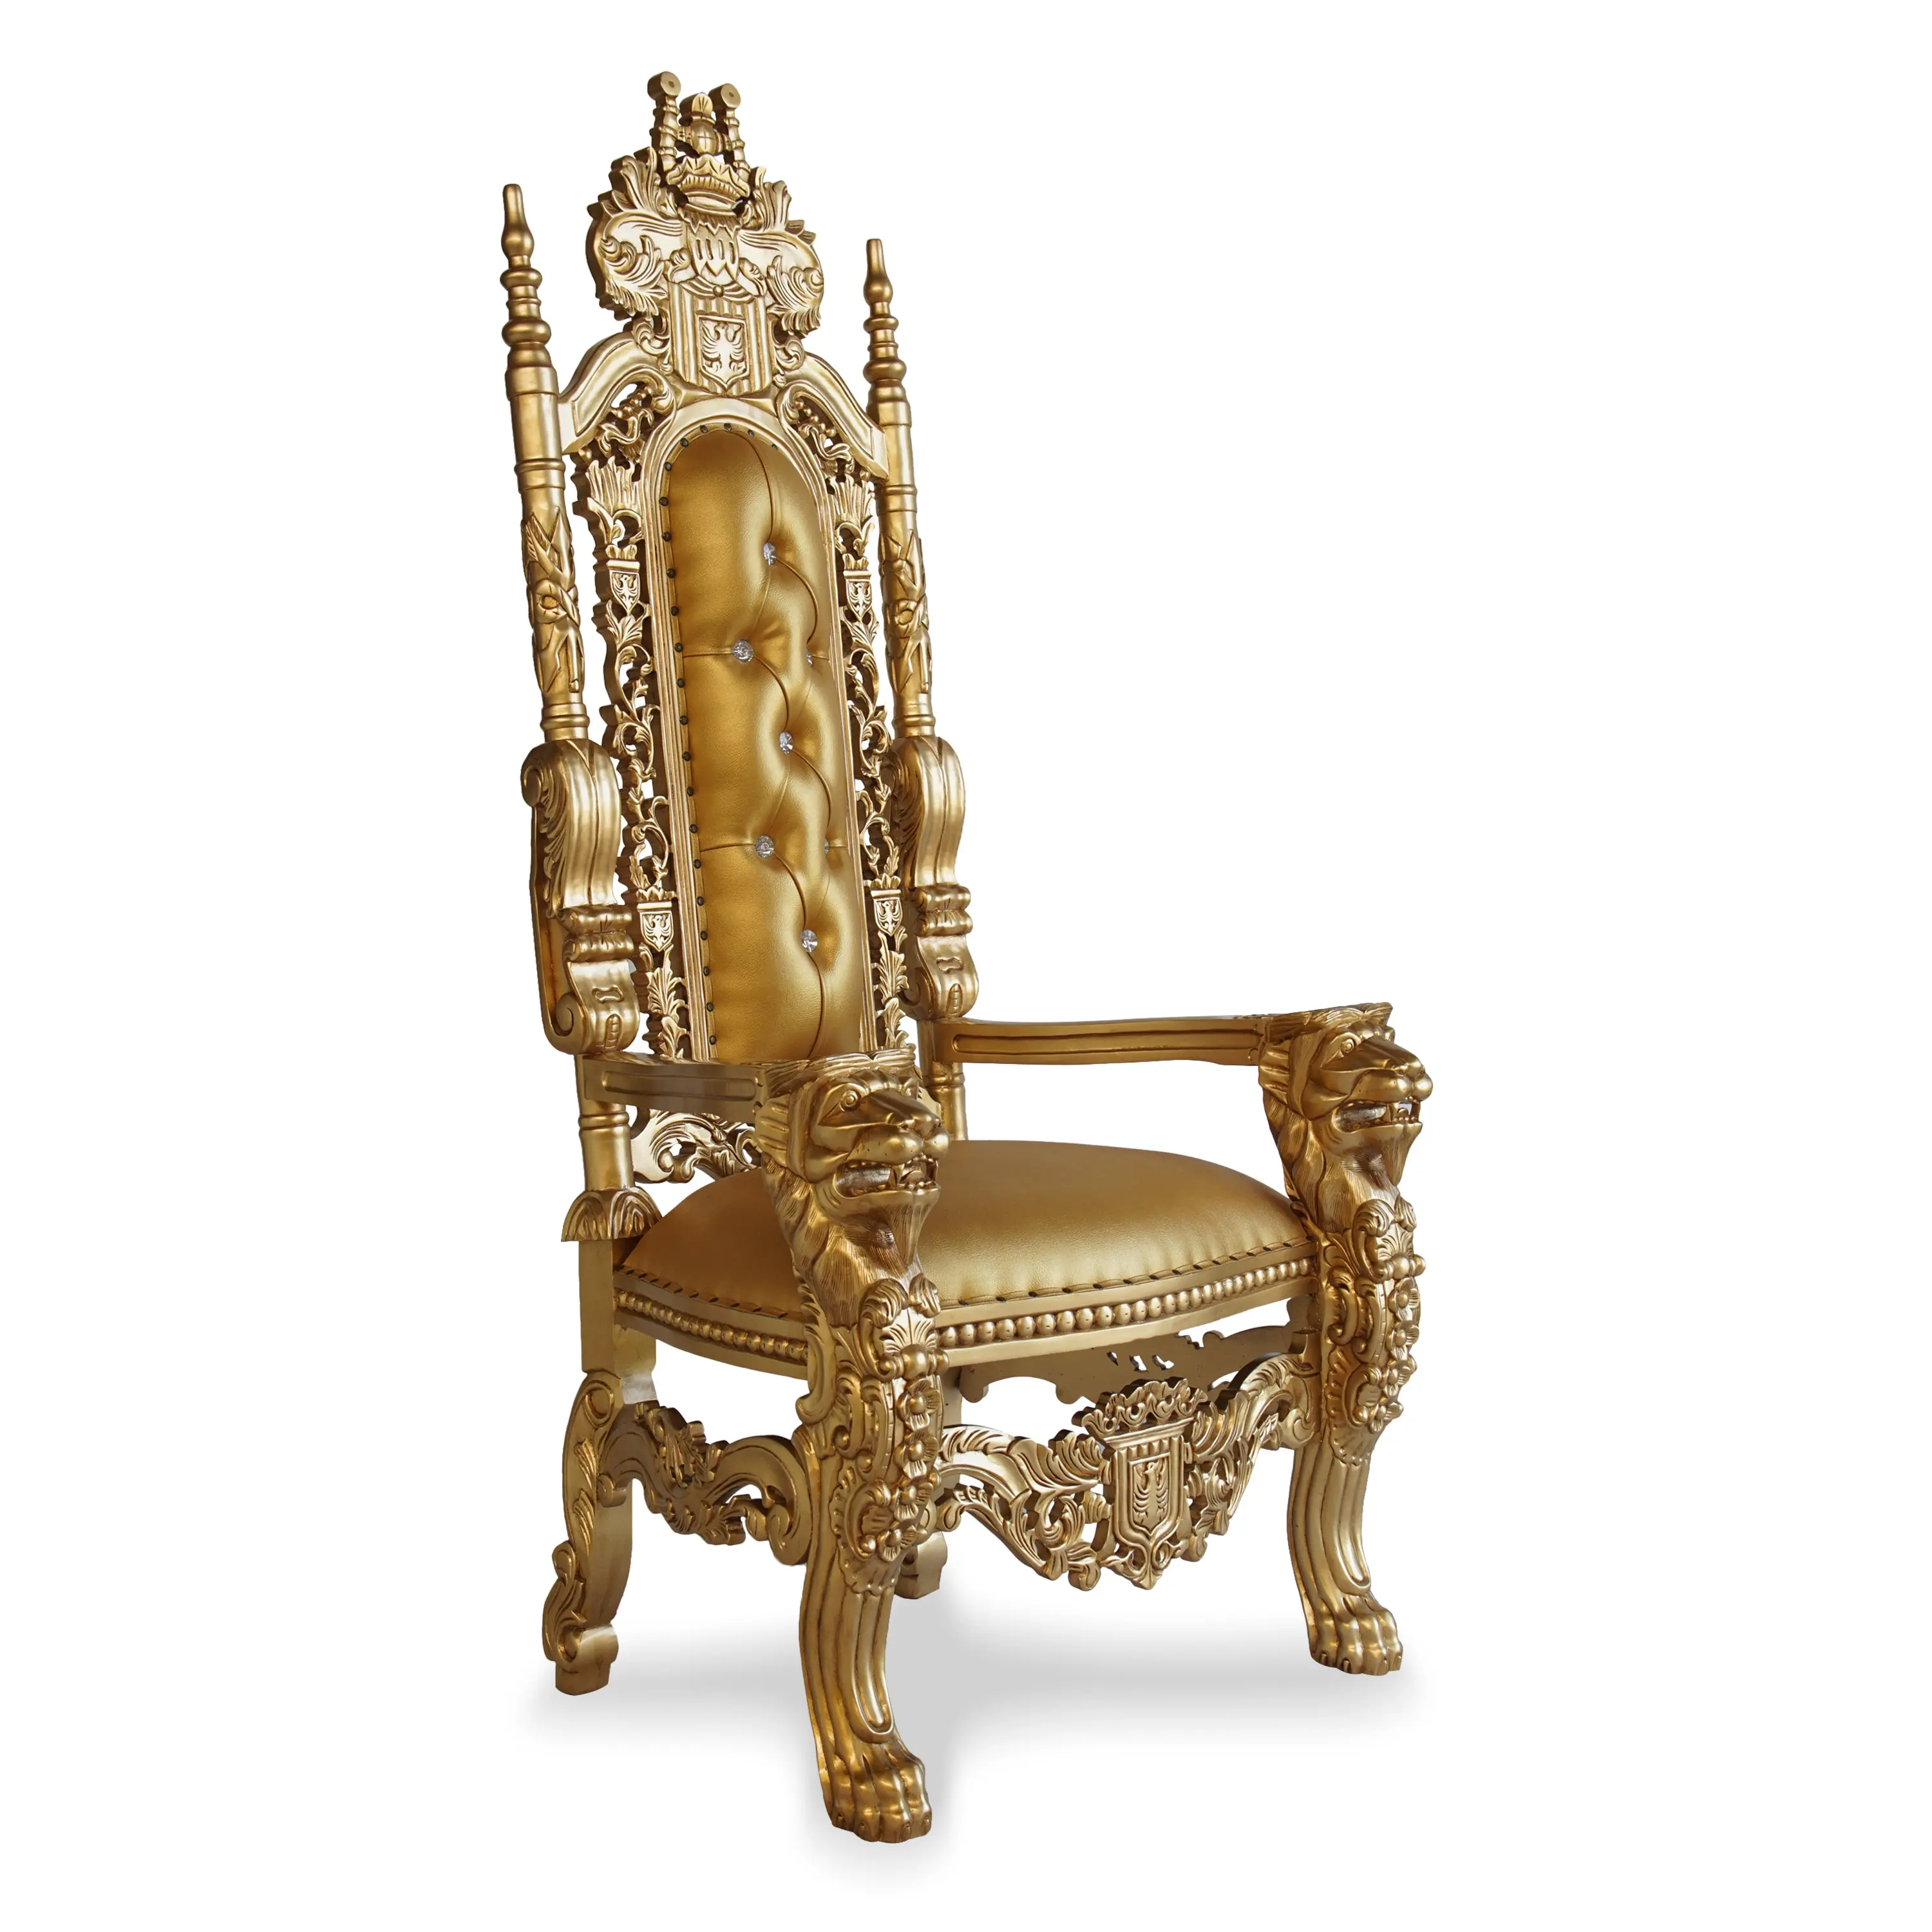 Classic Royal Lion Head Carved King Throne Chair with Gold Upholstery - Indonesian Furniture Home Furniture Leisure Chair Wooden